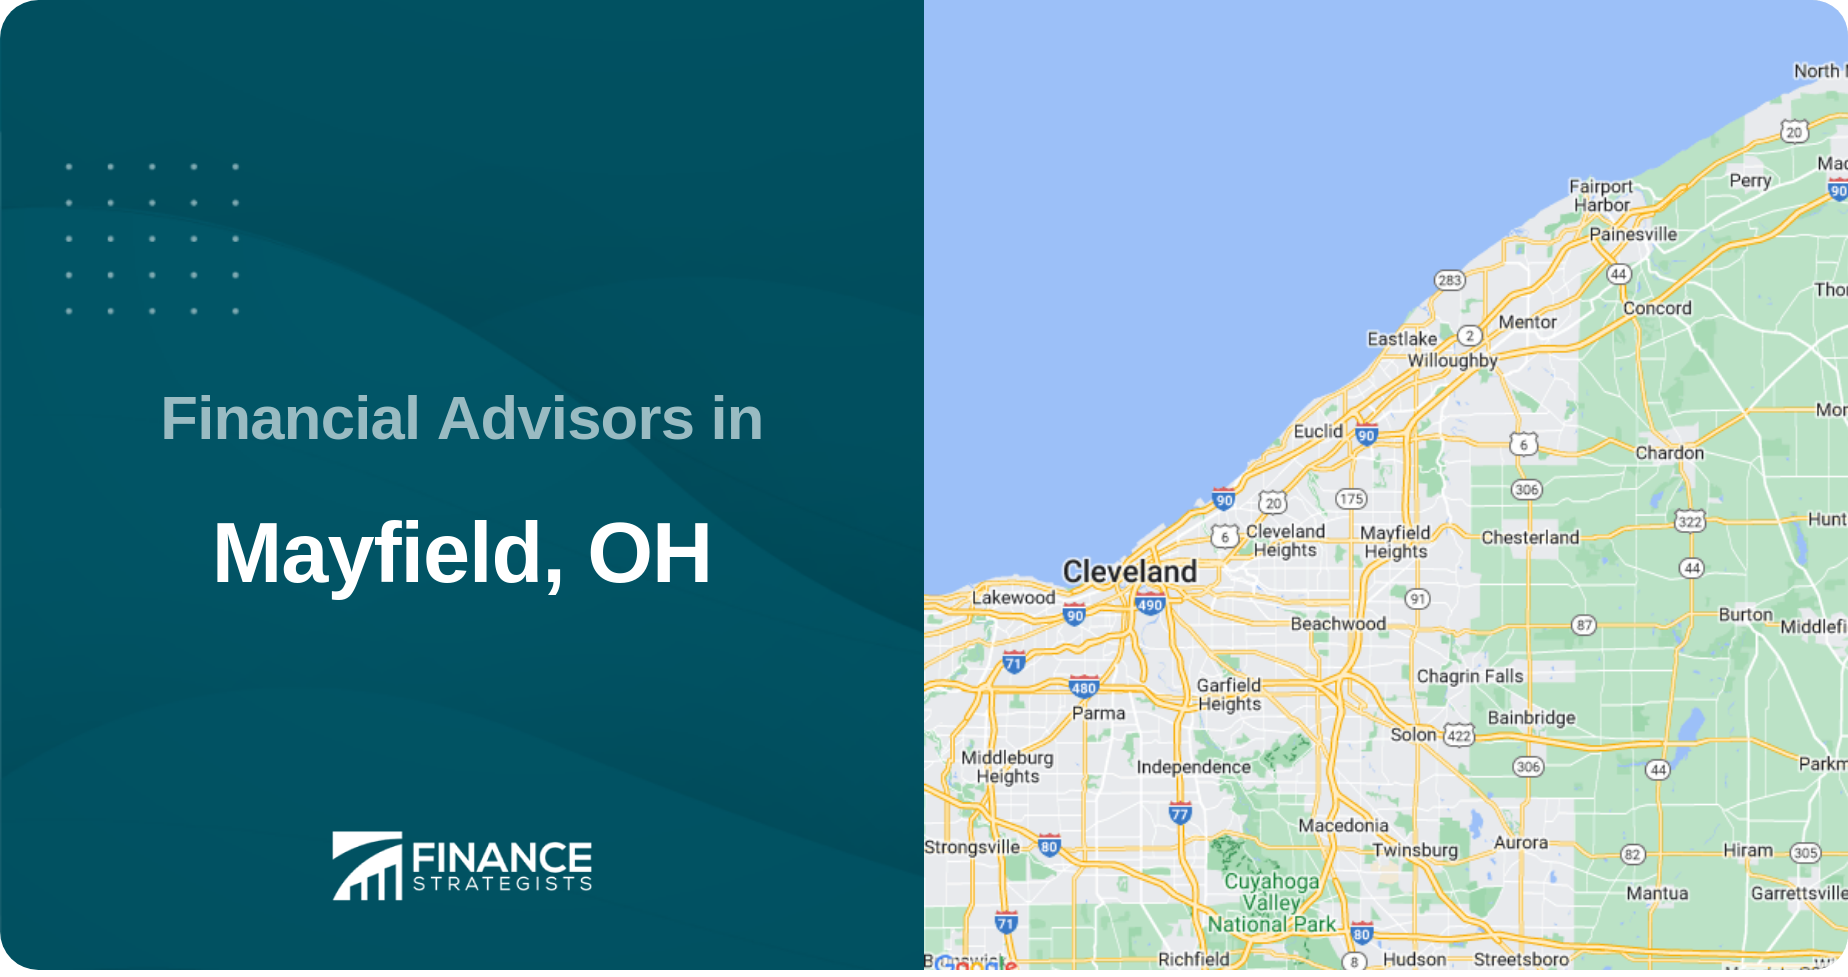 Financial Advisors in Mayfield, OH